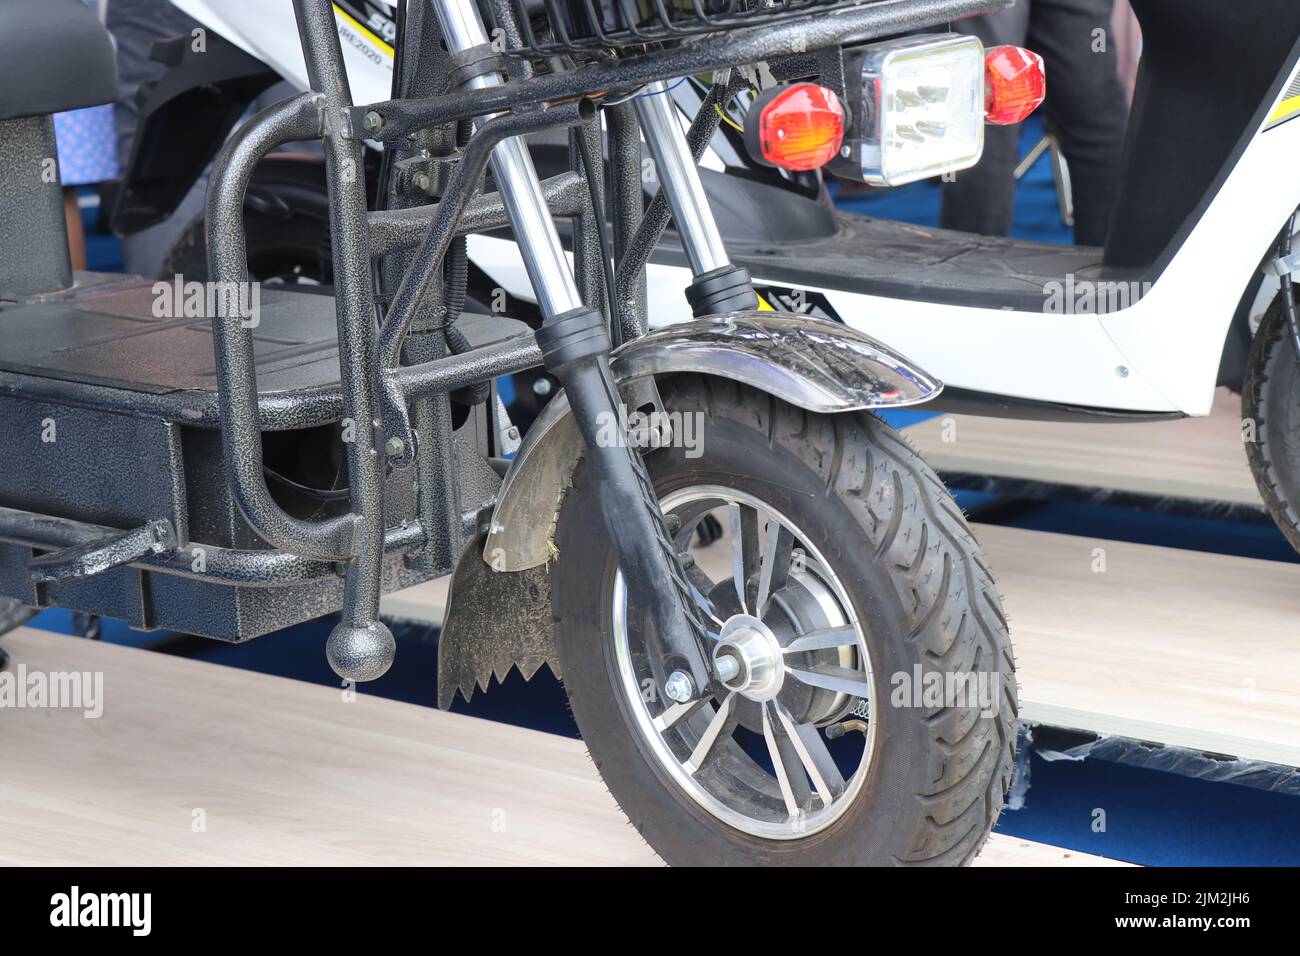 Front side view of a small goods or cargo carrying electric scooter Stock Photo